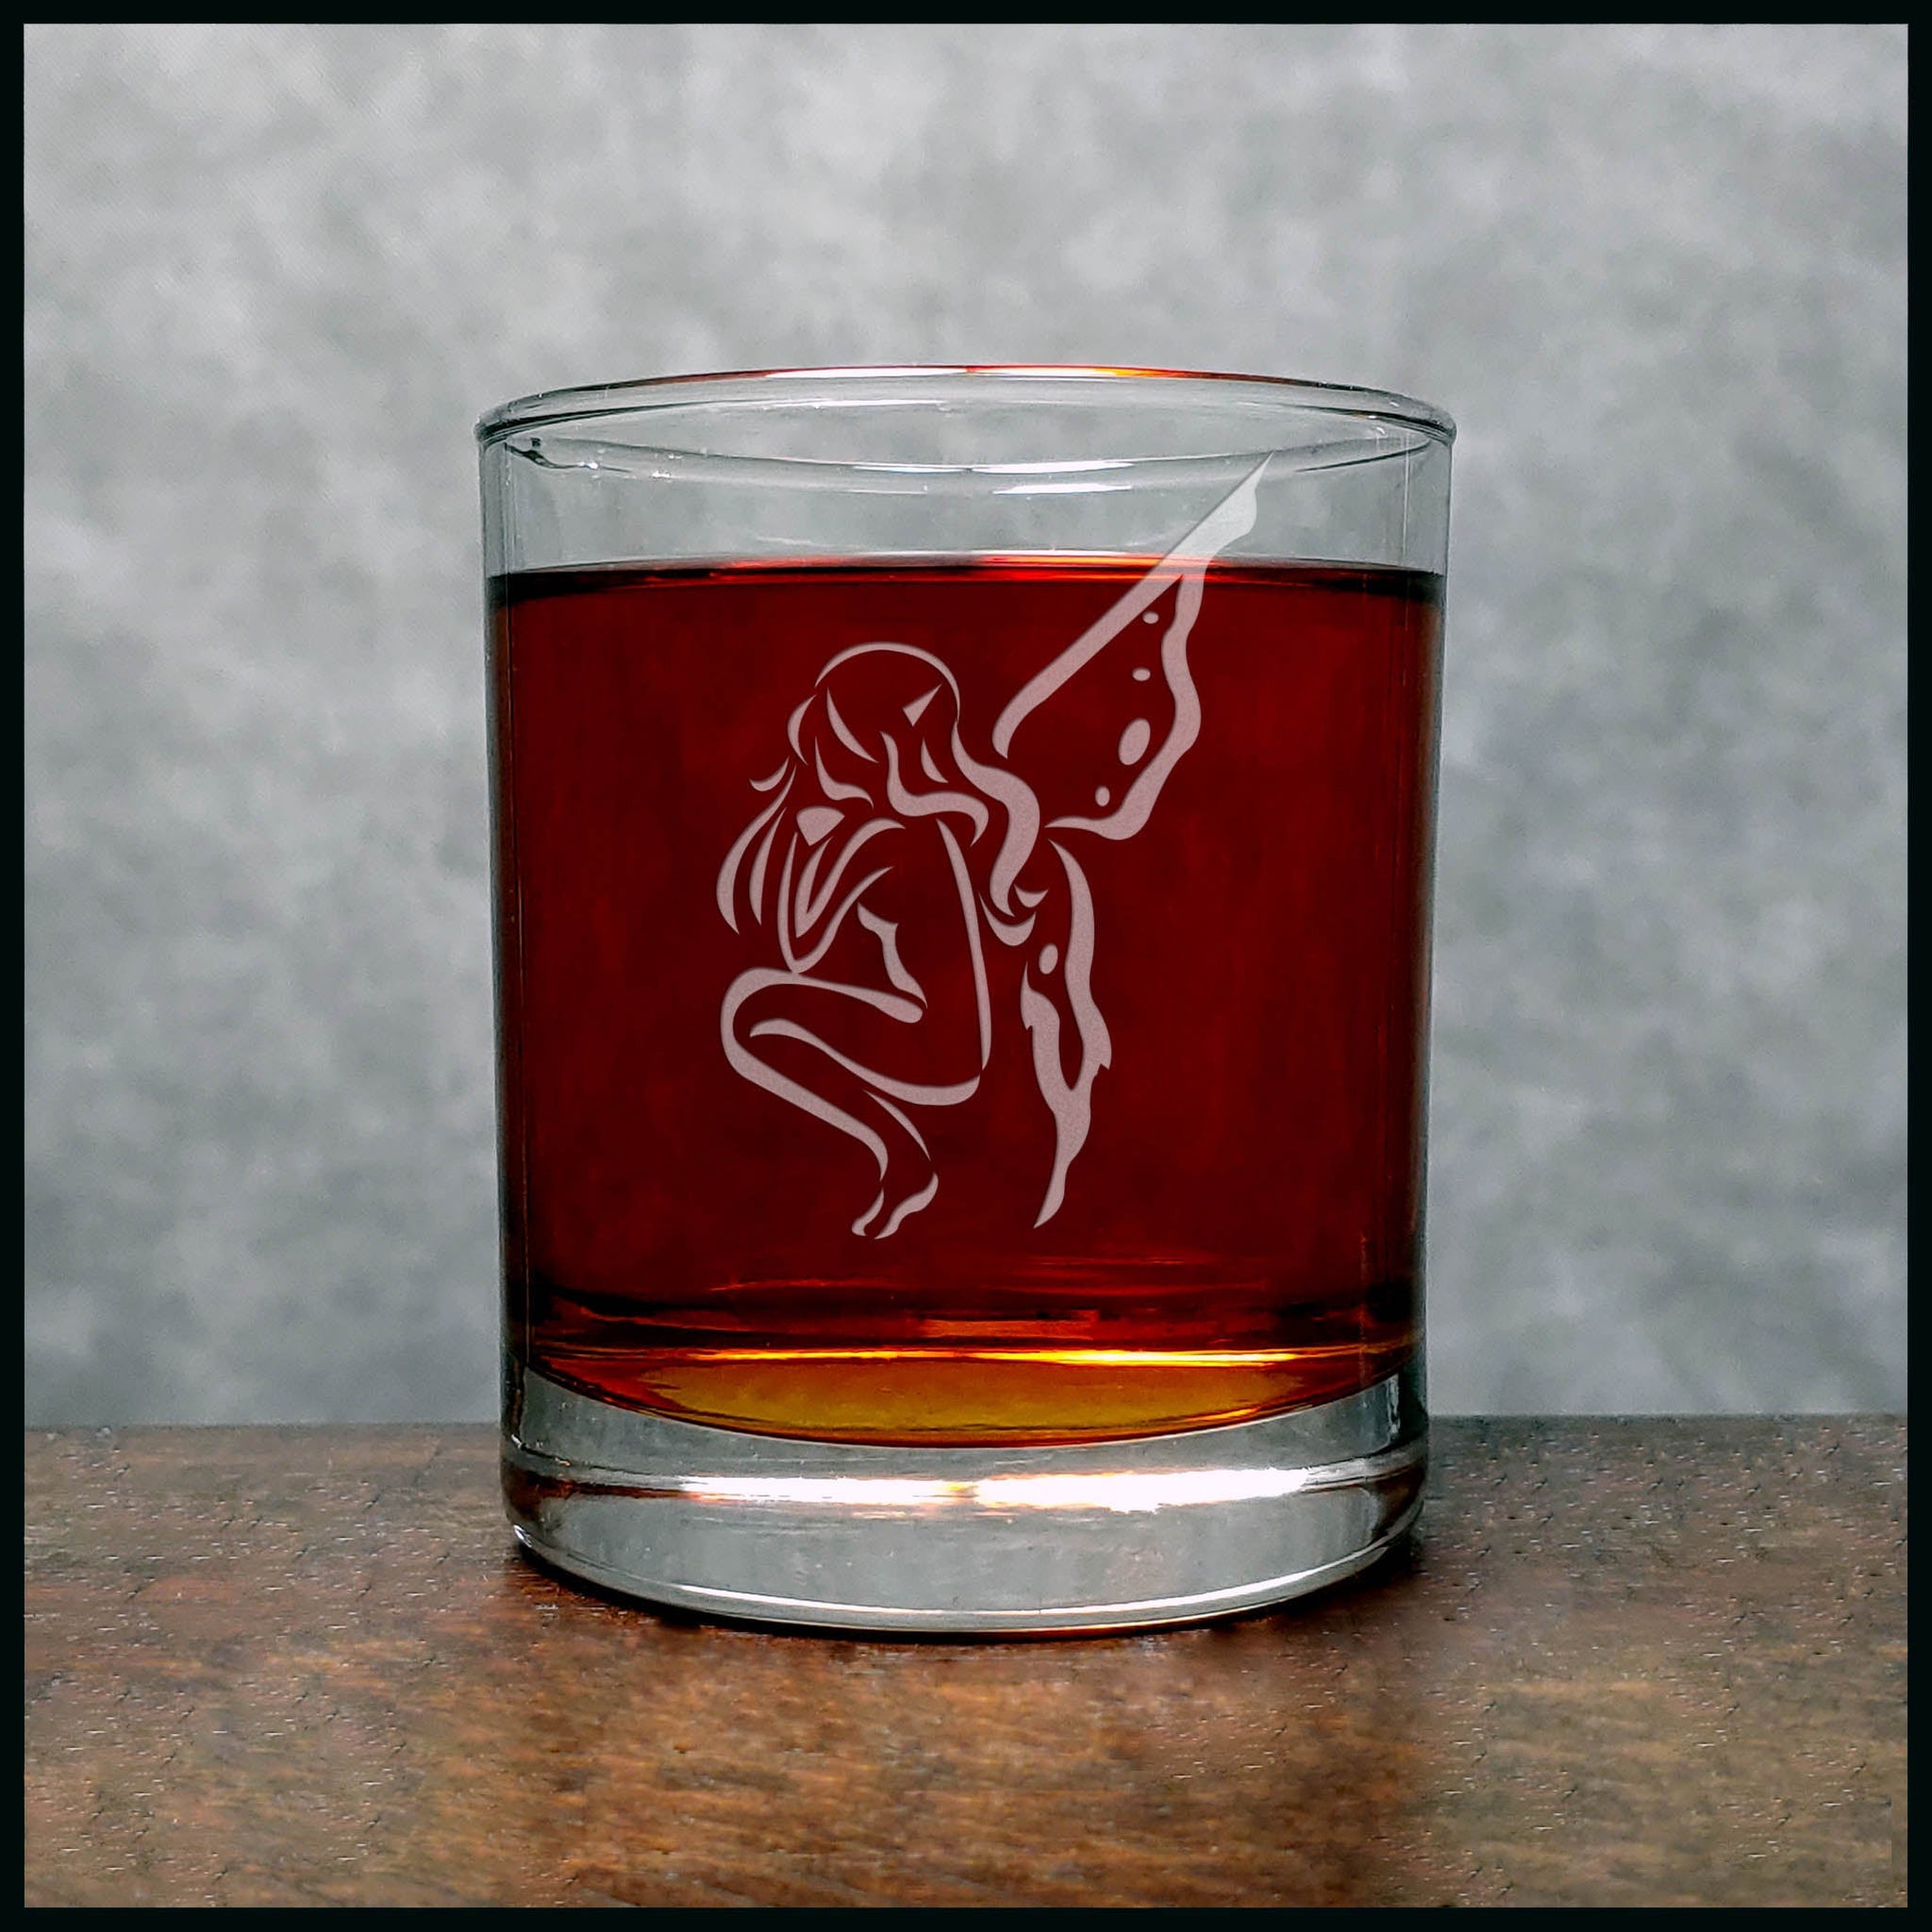 Fairy Personalized Whisky Glass - Design 4 - Copyright Hues in Glass